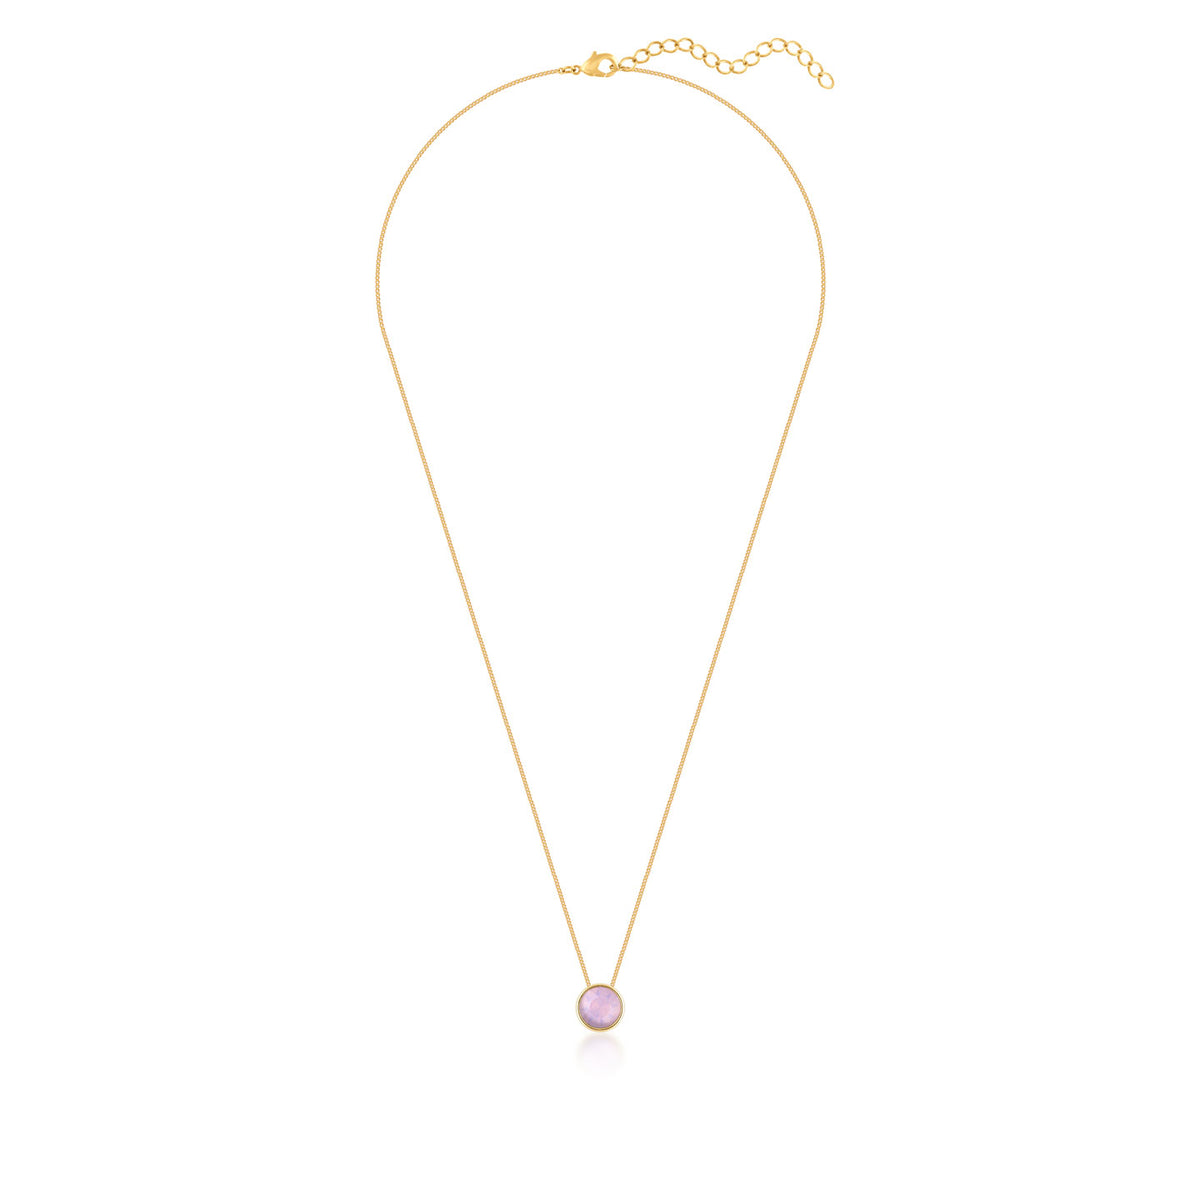 Harley Small Pendant Necklace with Pink Rose Water Round Opals from Swarovski Gold Plated - Ed Heart